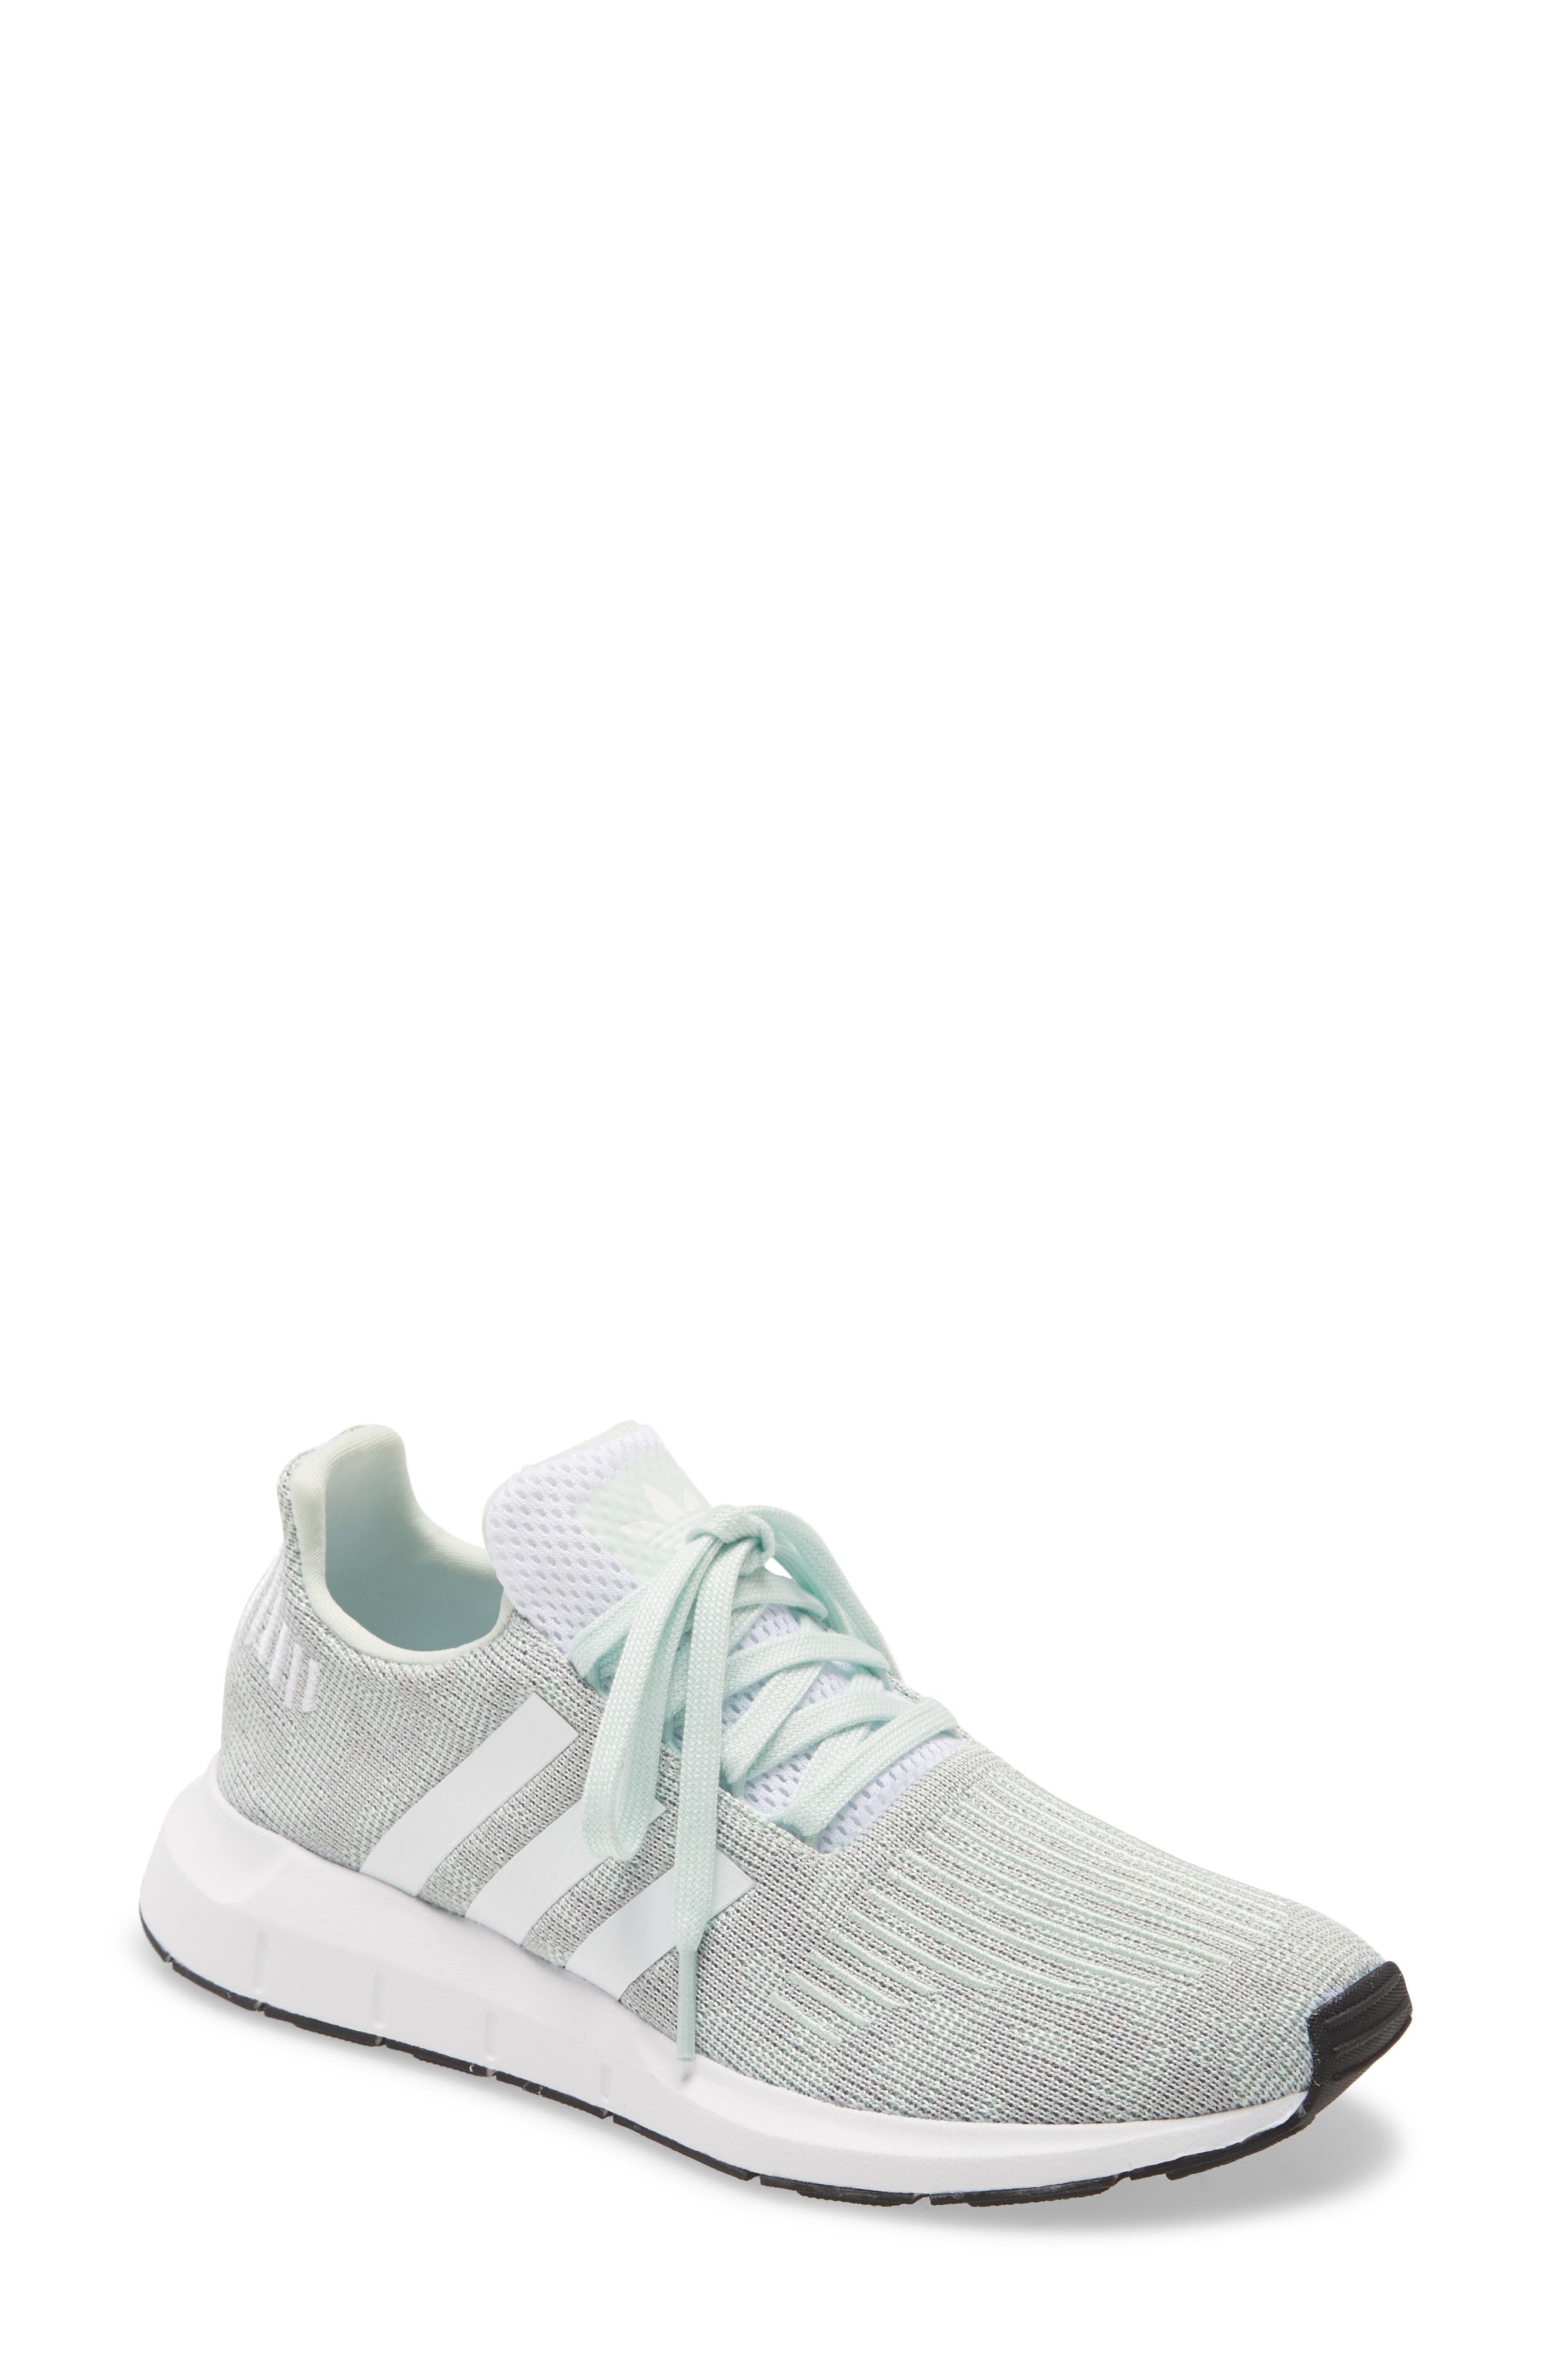 green adidas sneakers womens